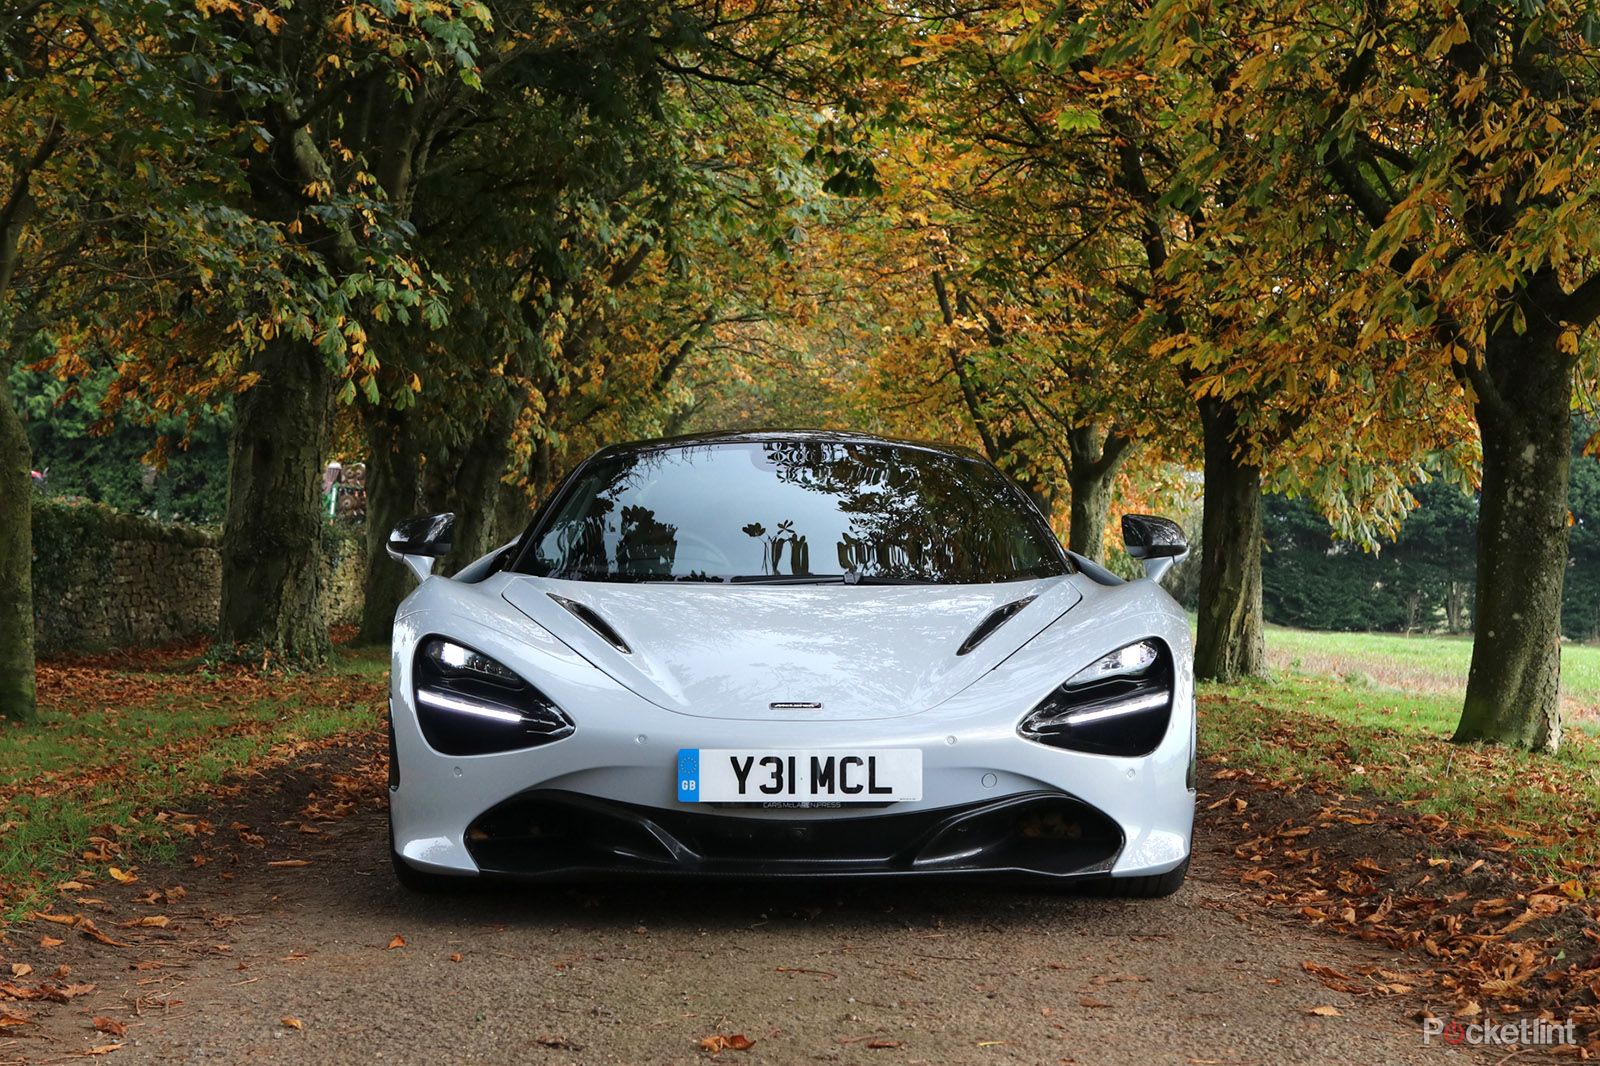 720S review: Shaking up the supercar world order